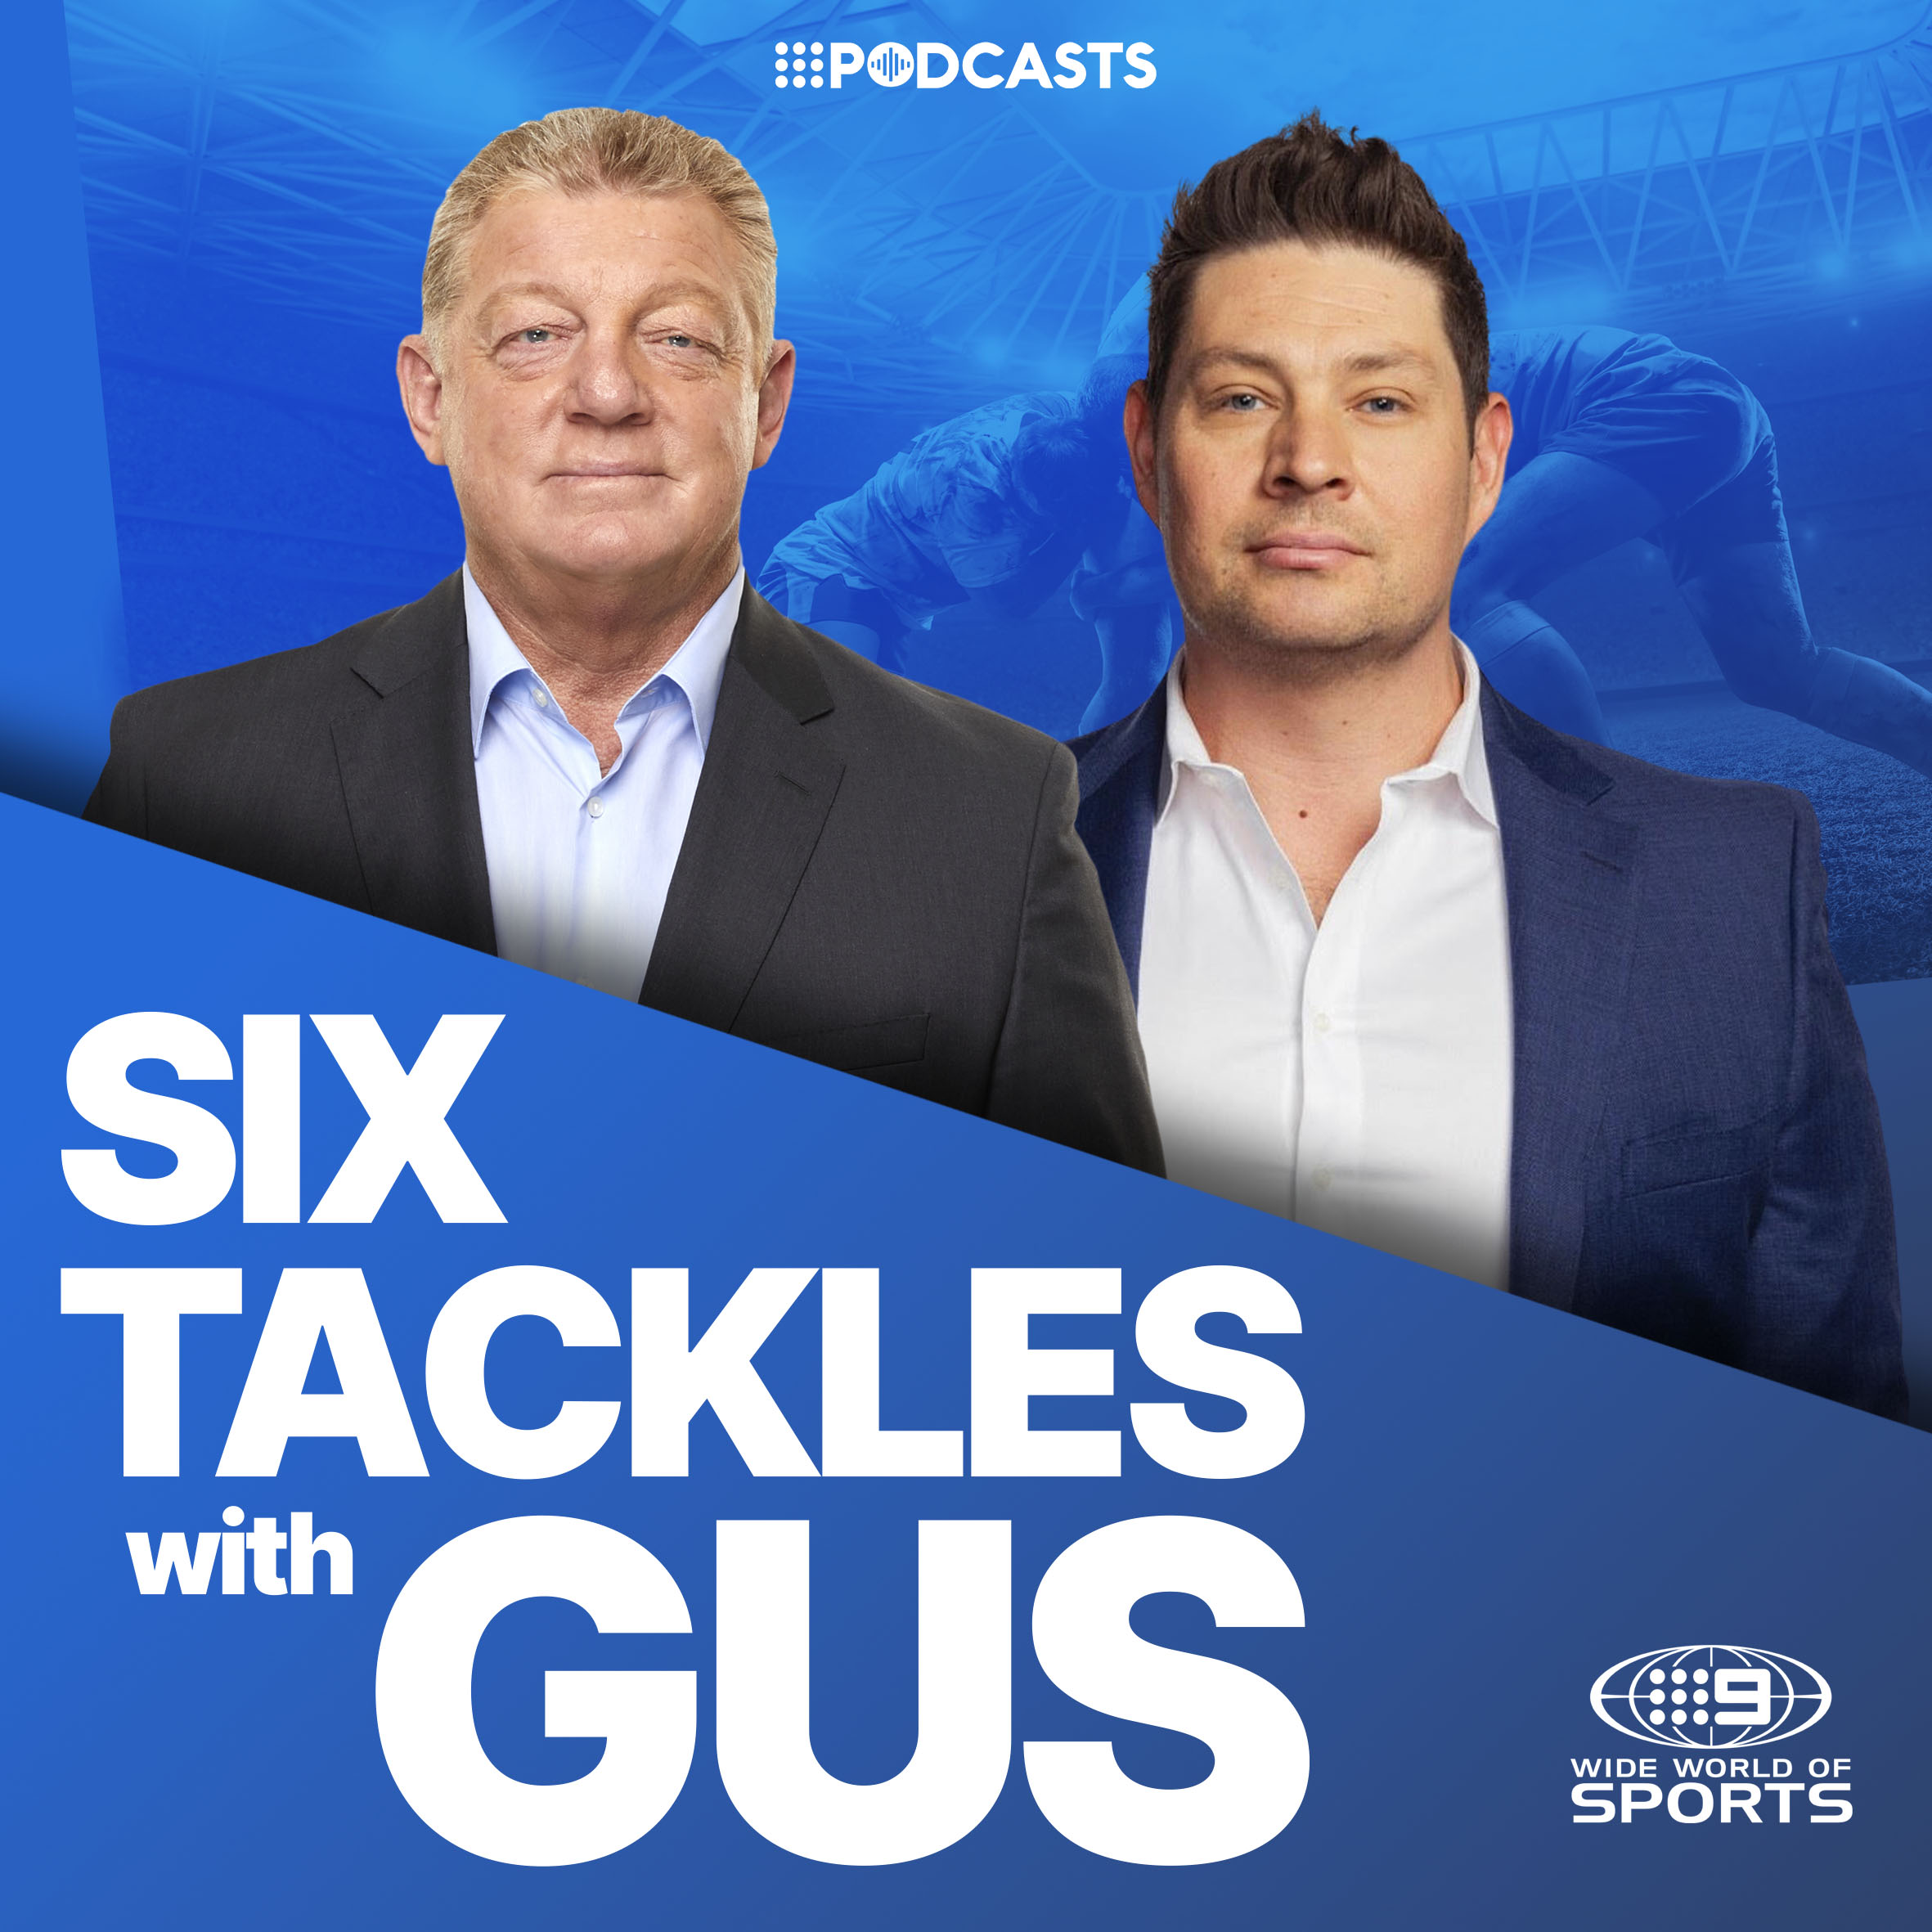 Gus on players having time off “It’s not in their best interest”